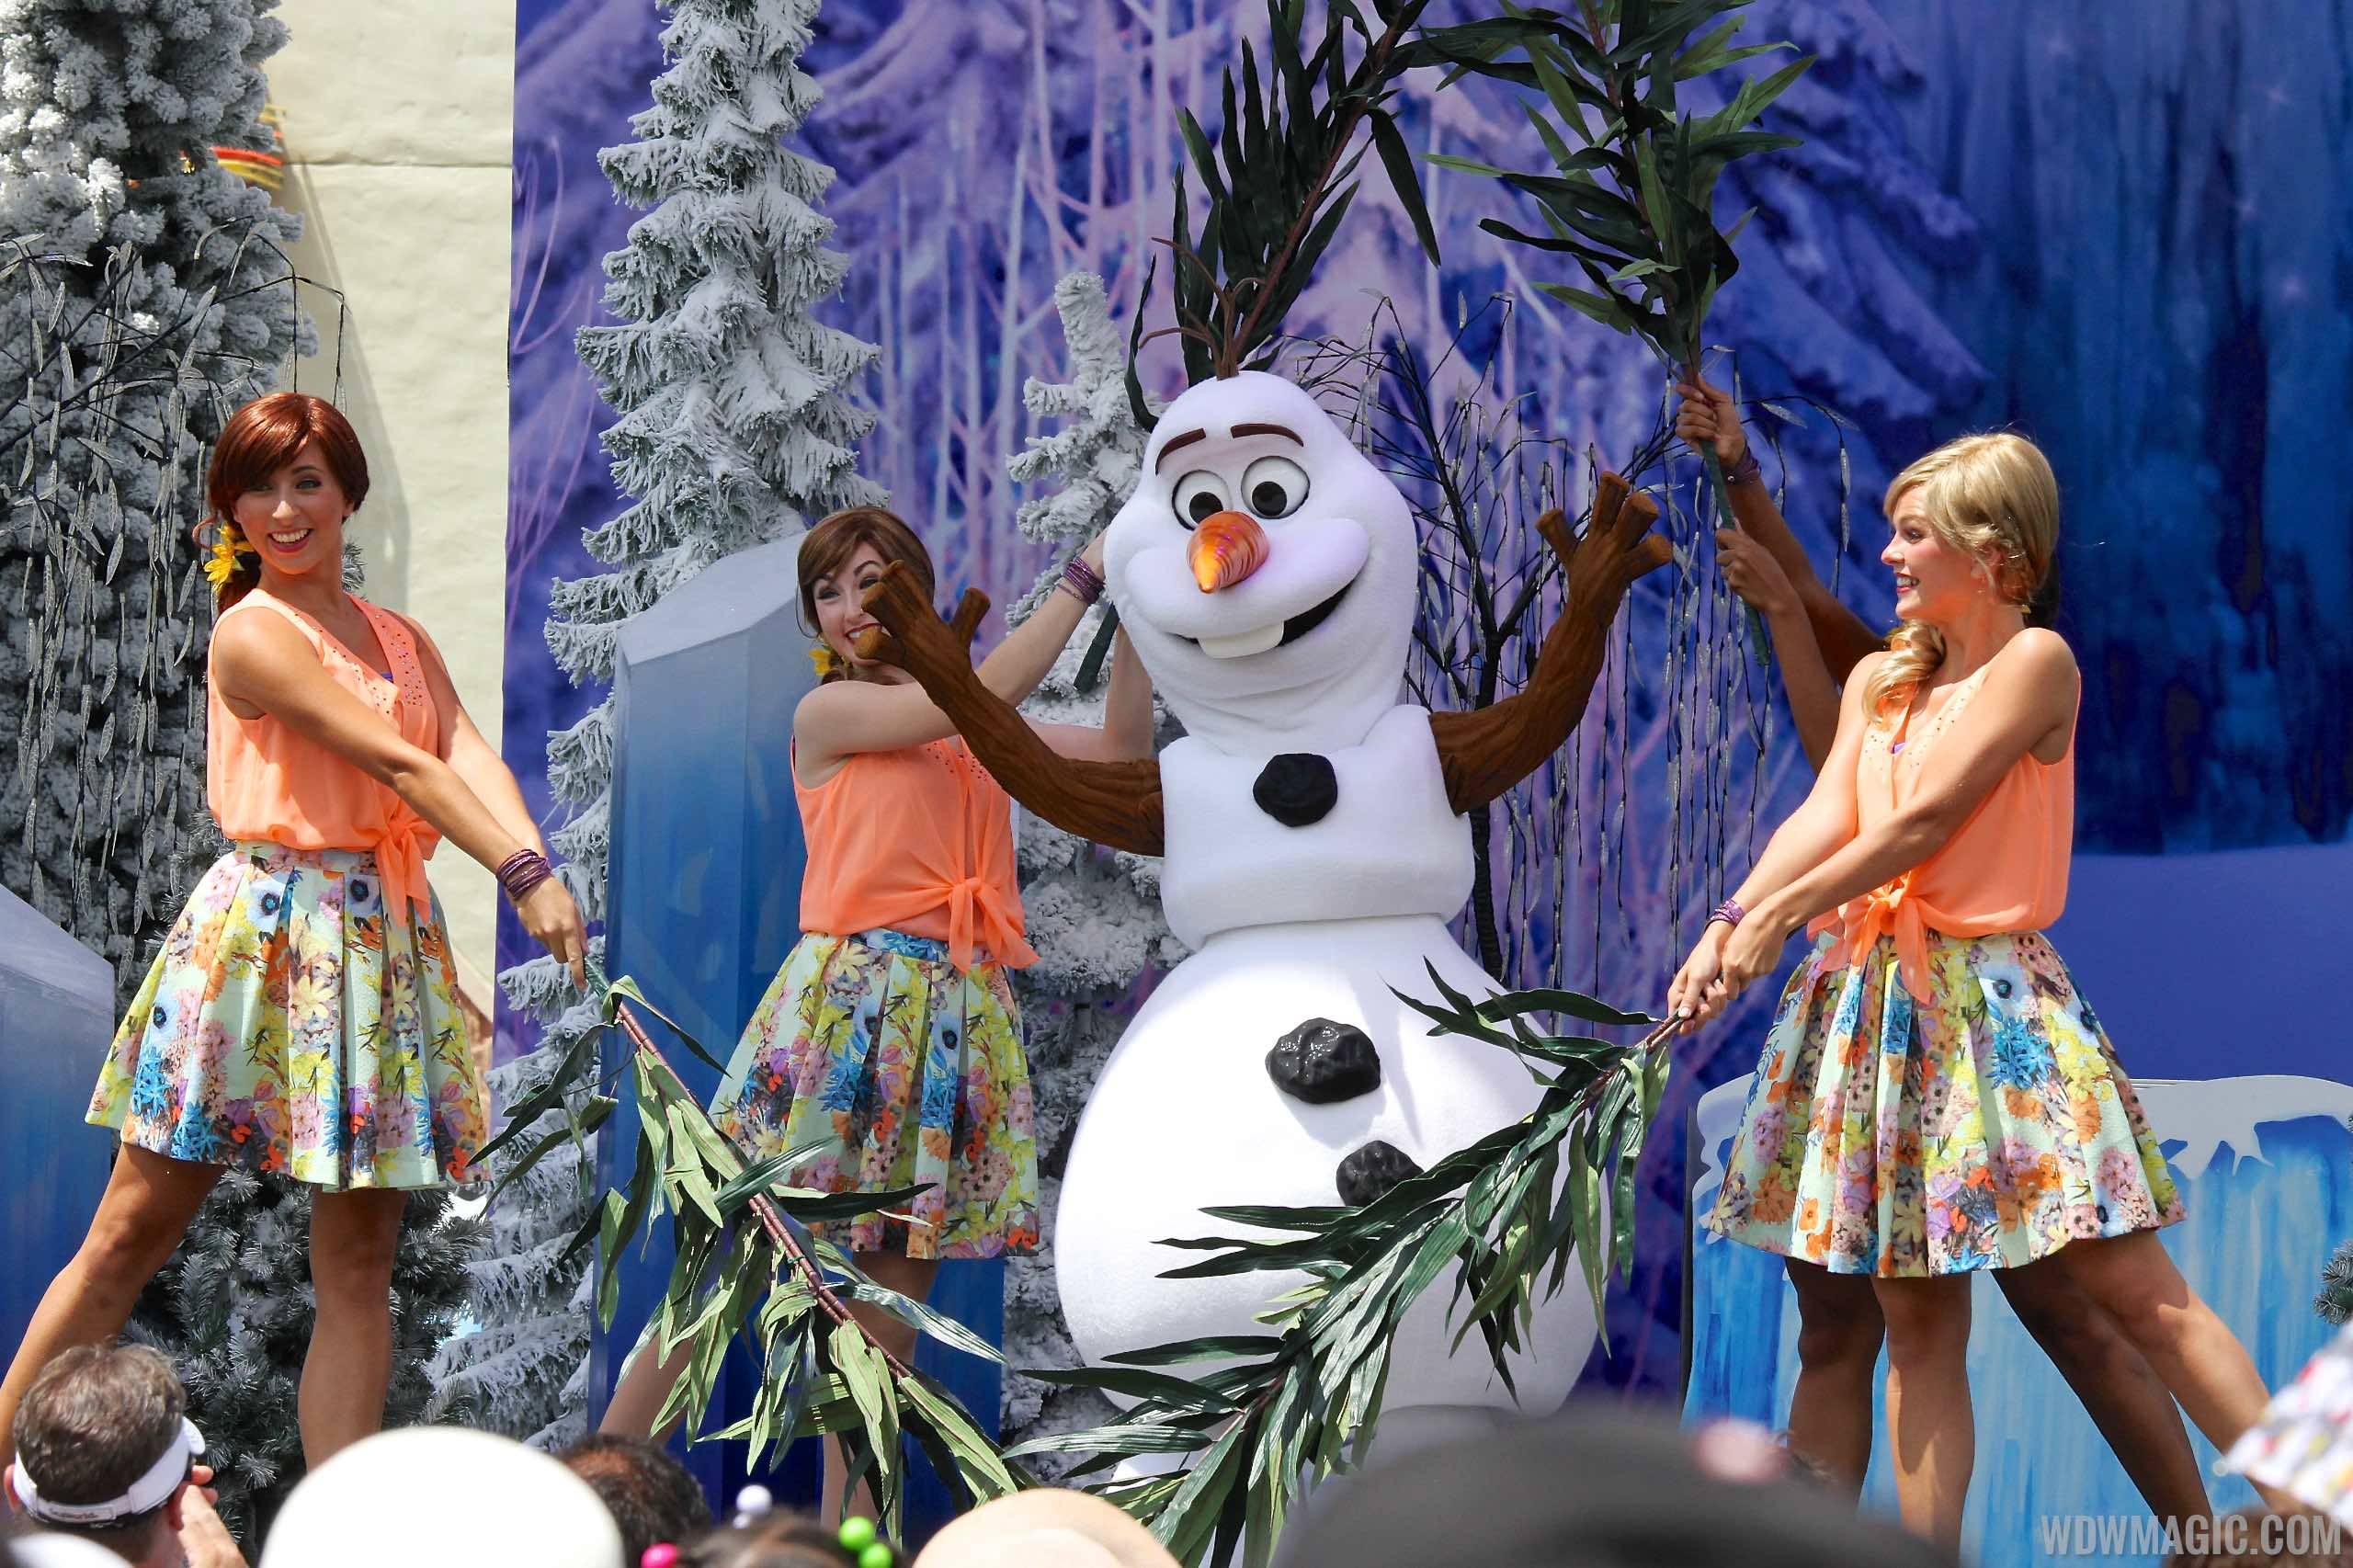 Meet Paul Briggs, the Head of Story for Disney's 'Frozen' at Disney's Hollywood Studios today